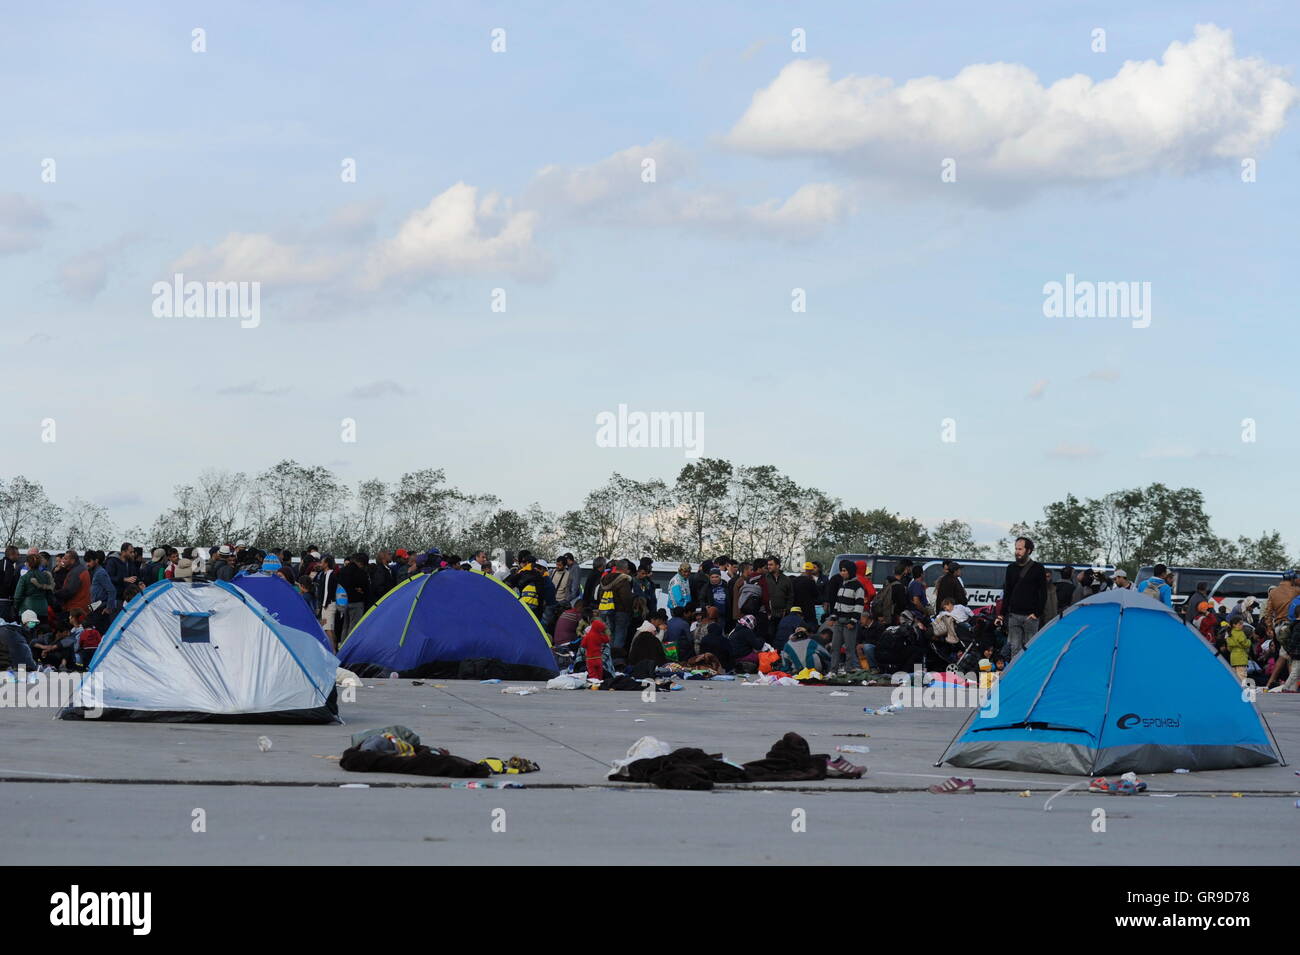 Refugees On The Austrian Border In Nickelsdorf Stock Photo